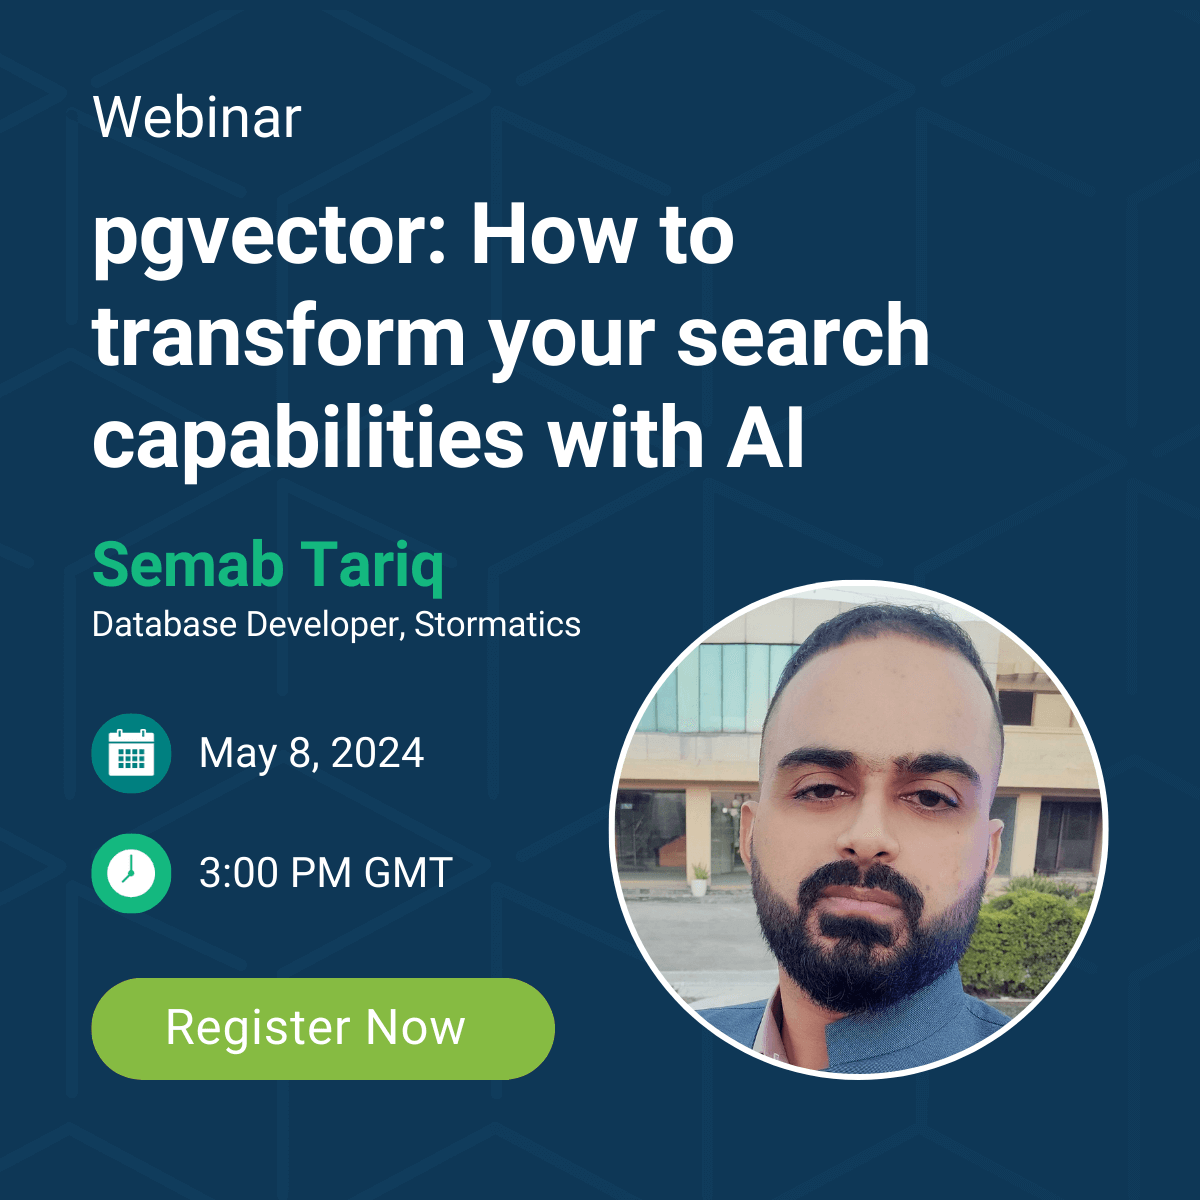 pgvector - how to transform your search capabilities with AI